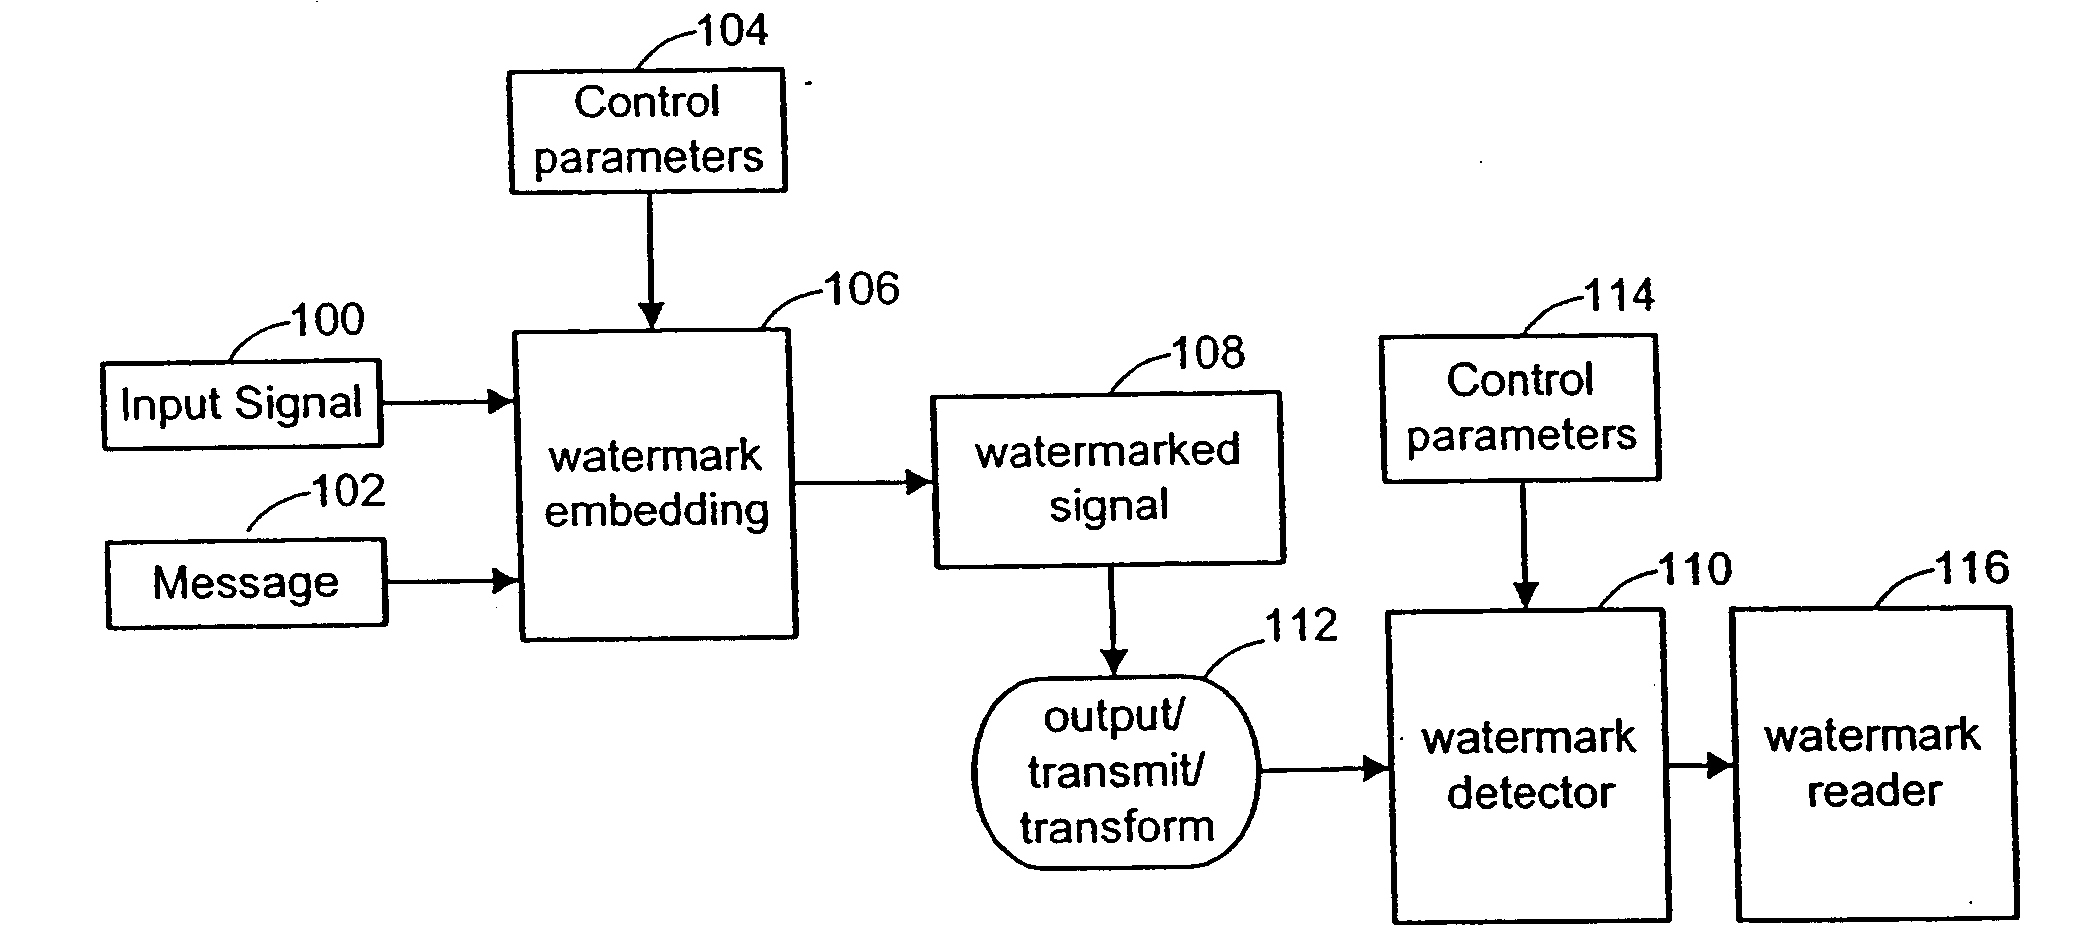 Authentication of Physical and Electronic Media Objects Using Digital Watermarks